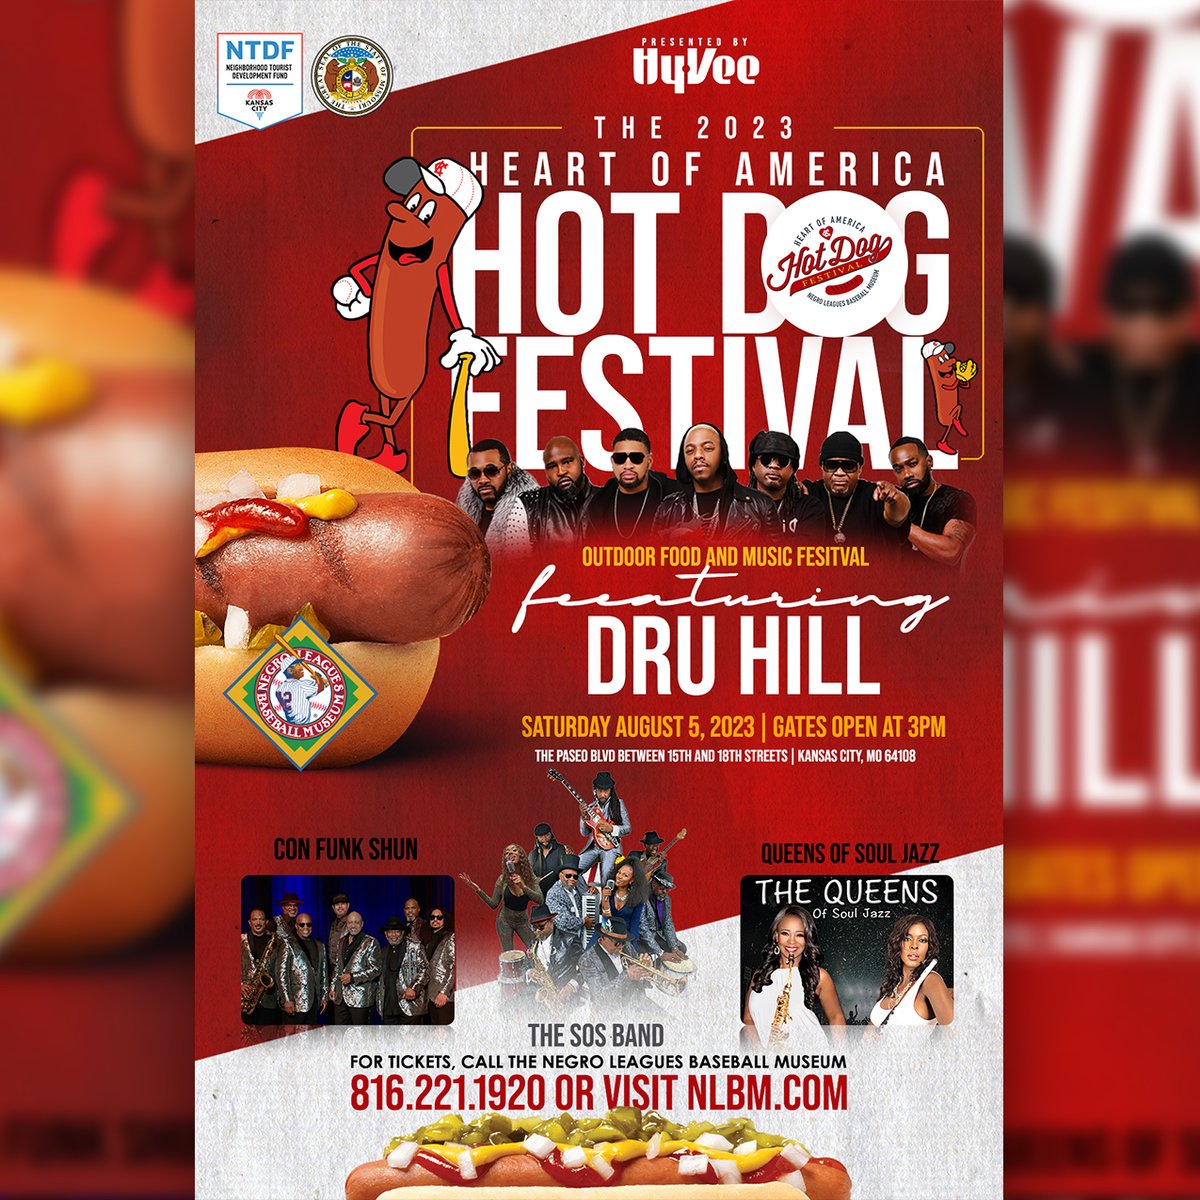 There's still time to get your tickets to the Heart of America Hot Dog Festival happening this Saturday, August 5th on the Paseo Blvd. between 15th & 18th streets. Get tickets & learn more here --> hubs.ly/Q01Zn7lm0 @NLBMuseumKC | @NLBMHotDogFest